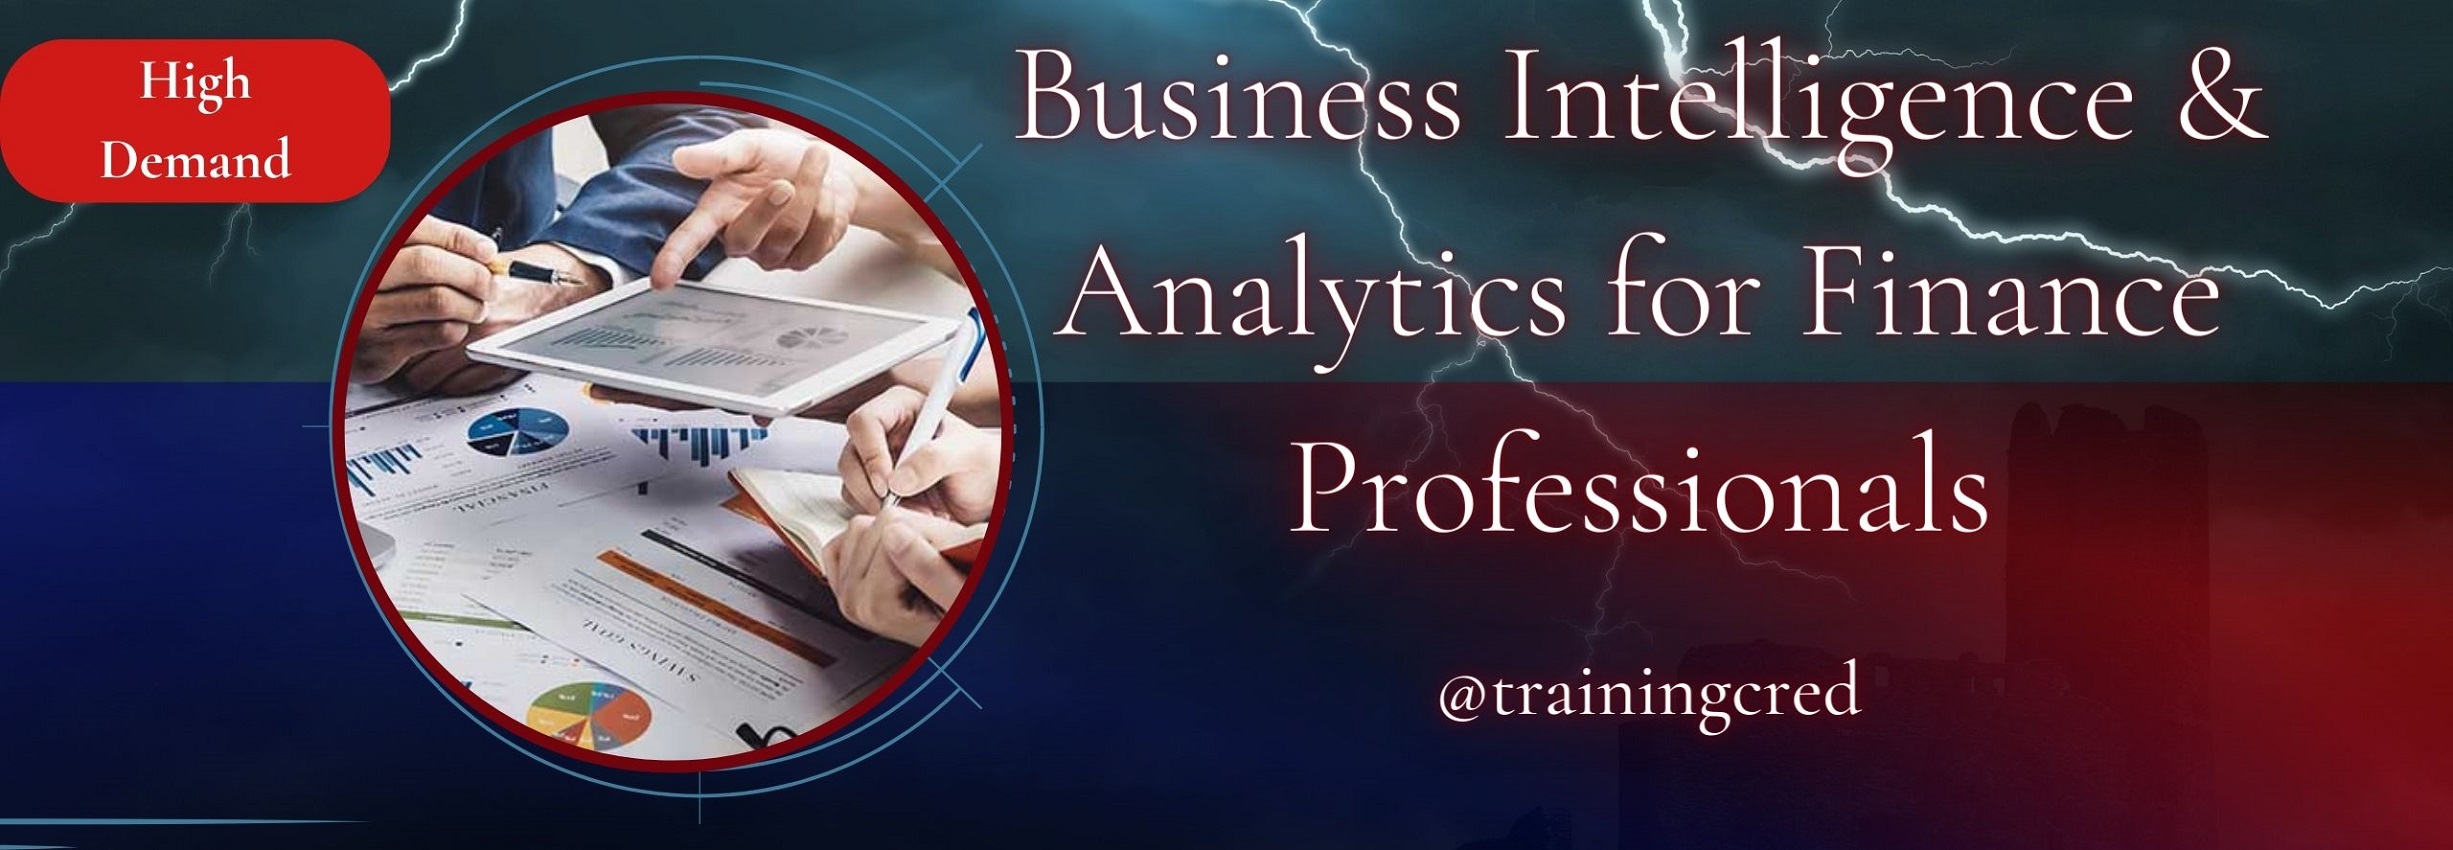 Business Intelligence and Analytics for Finance Professionals Training